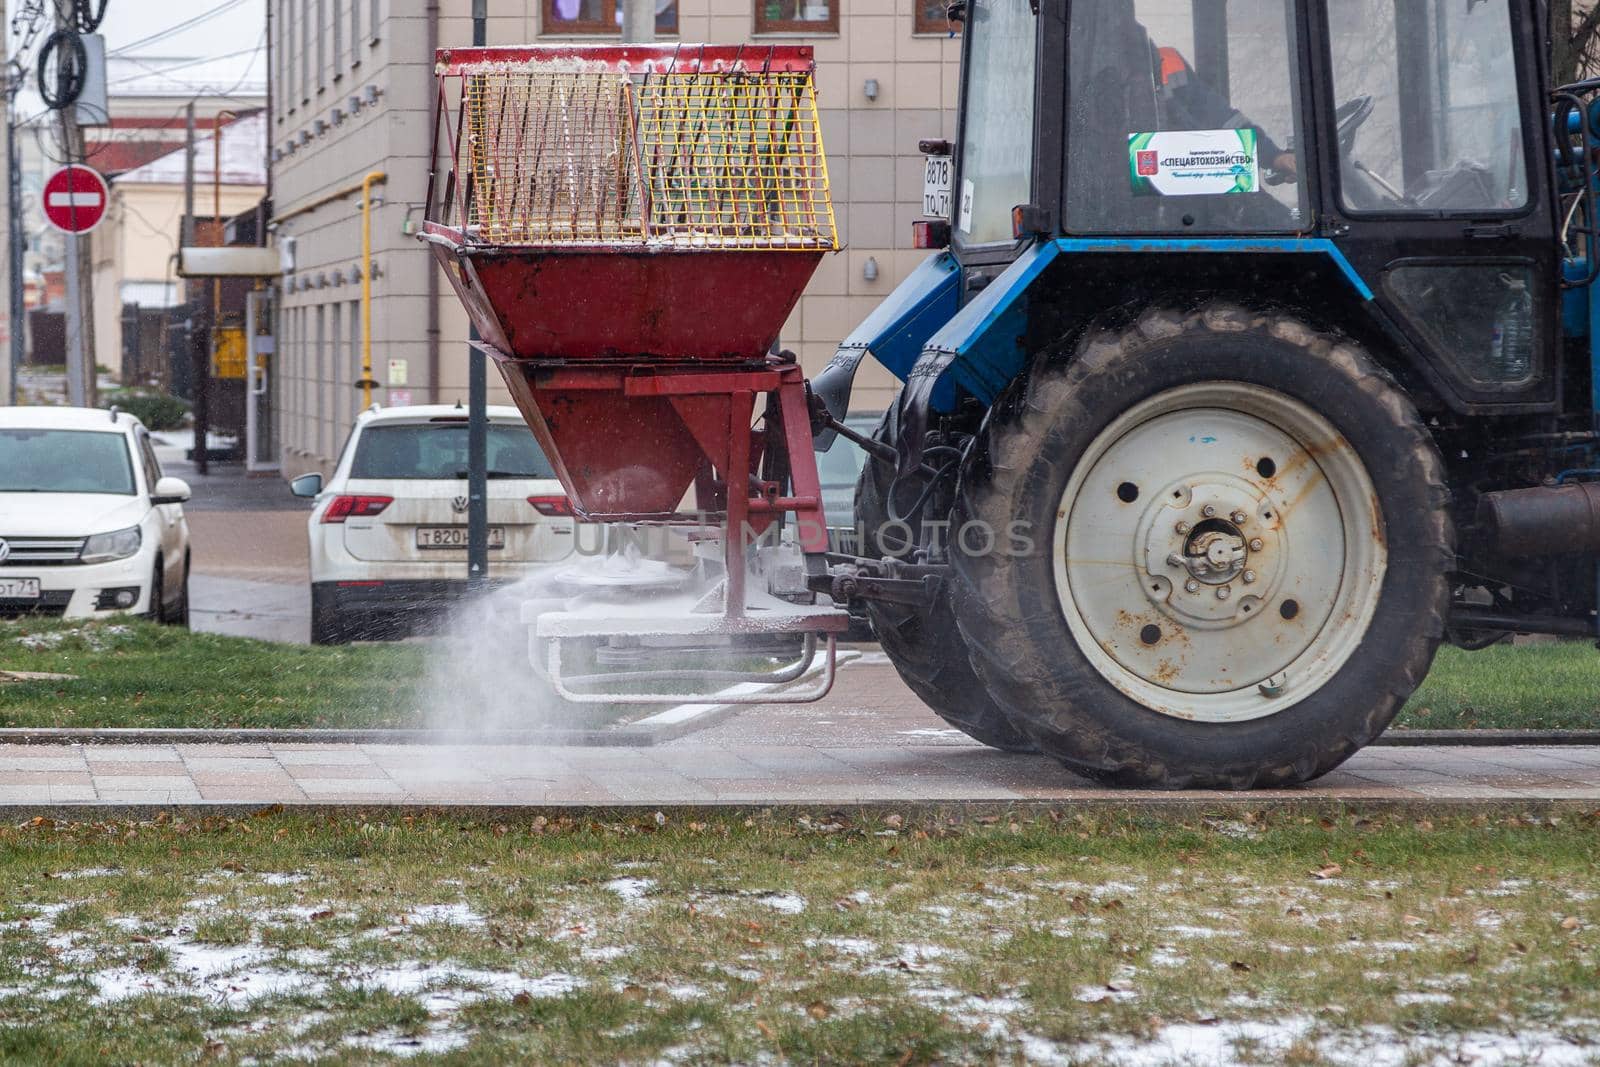 TULA, RUSSIA - NOVEMBER 21, 2020: Tractor spreading salt reagent over city pavement at winter daylight.